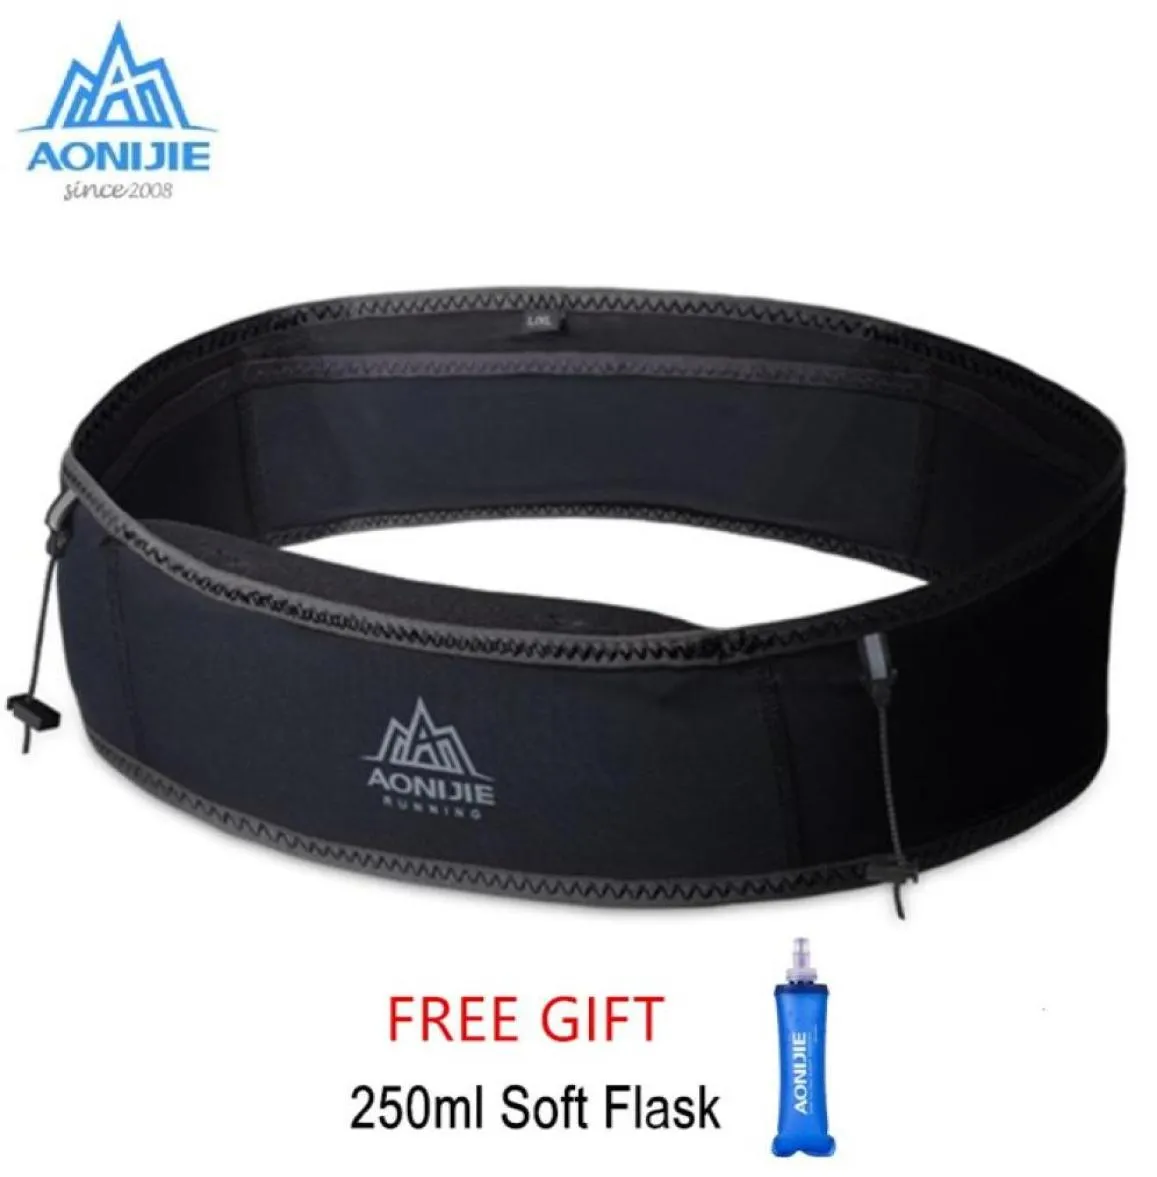 Aonijie W938S Trail Running Taill Belt Bag Men Women Gym Sport Fitness Invisible Fanny Pack Phone Holder Marathon Race Gear8024447090561